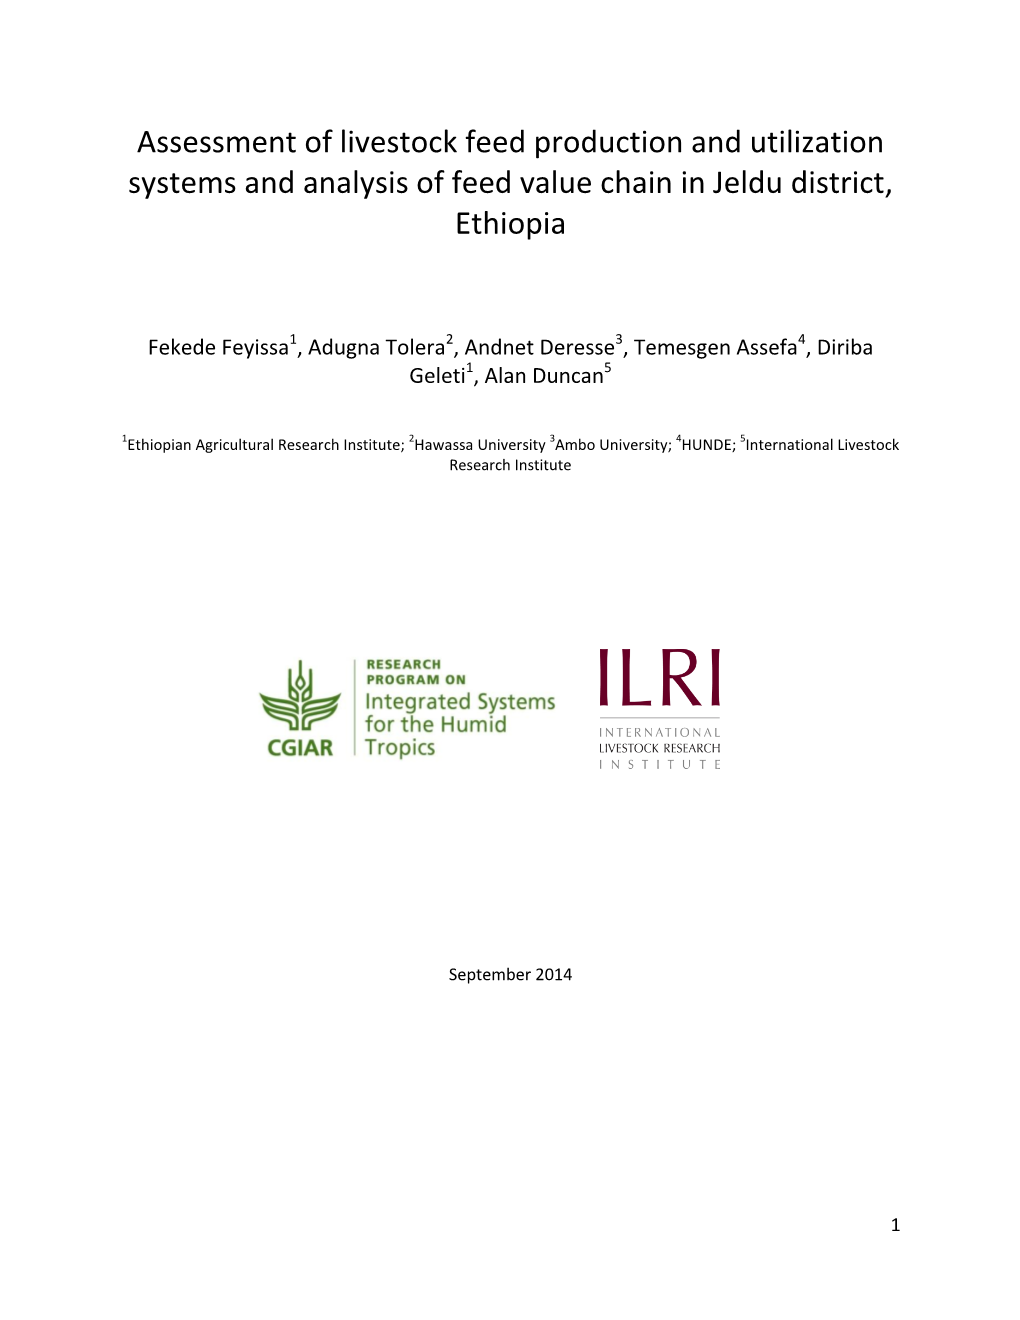 Assessment of Livestock Feed Production and Utilization Systems and Analysis of Feed Value Chain in Jeldu District, Ethiopia